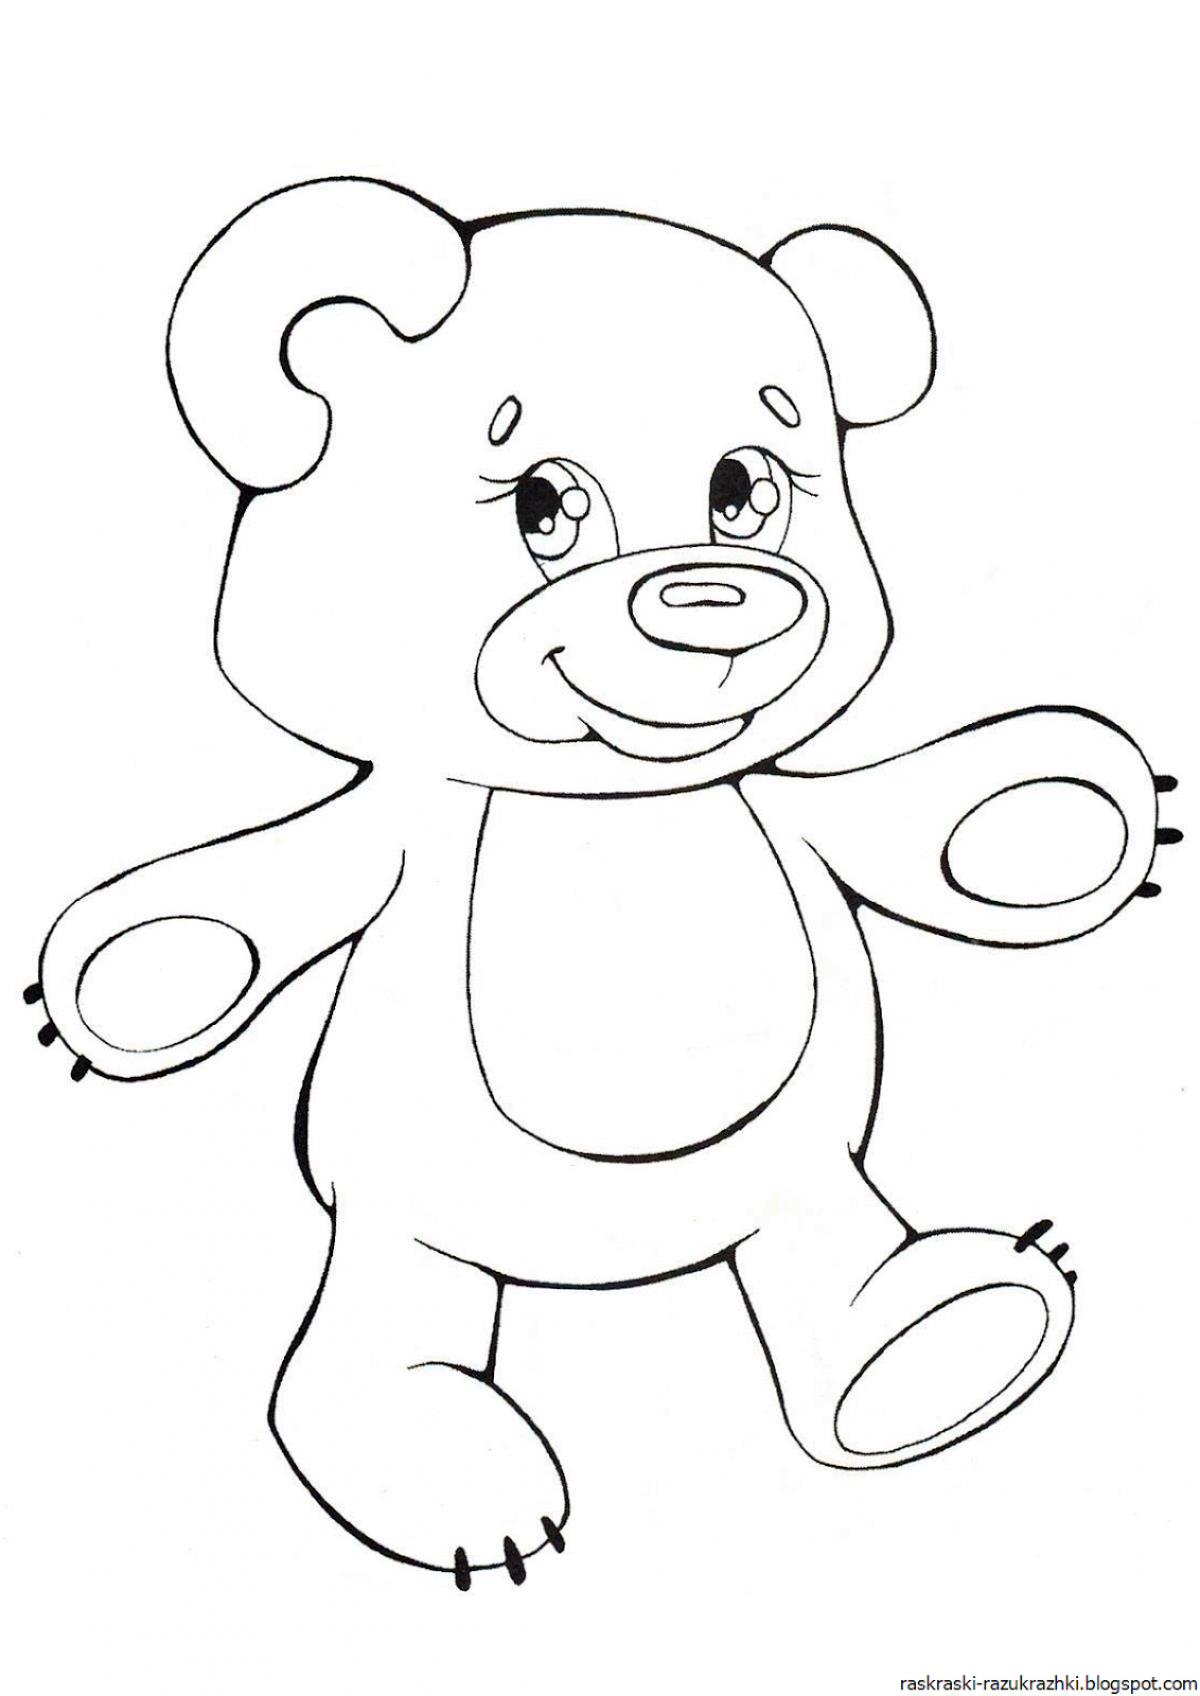 Coloring book cheerful teddy bear for children 5-6 years old